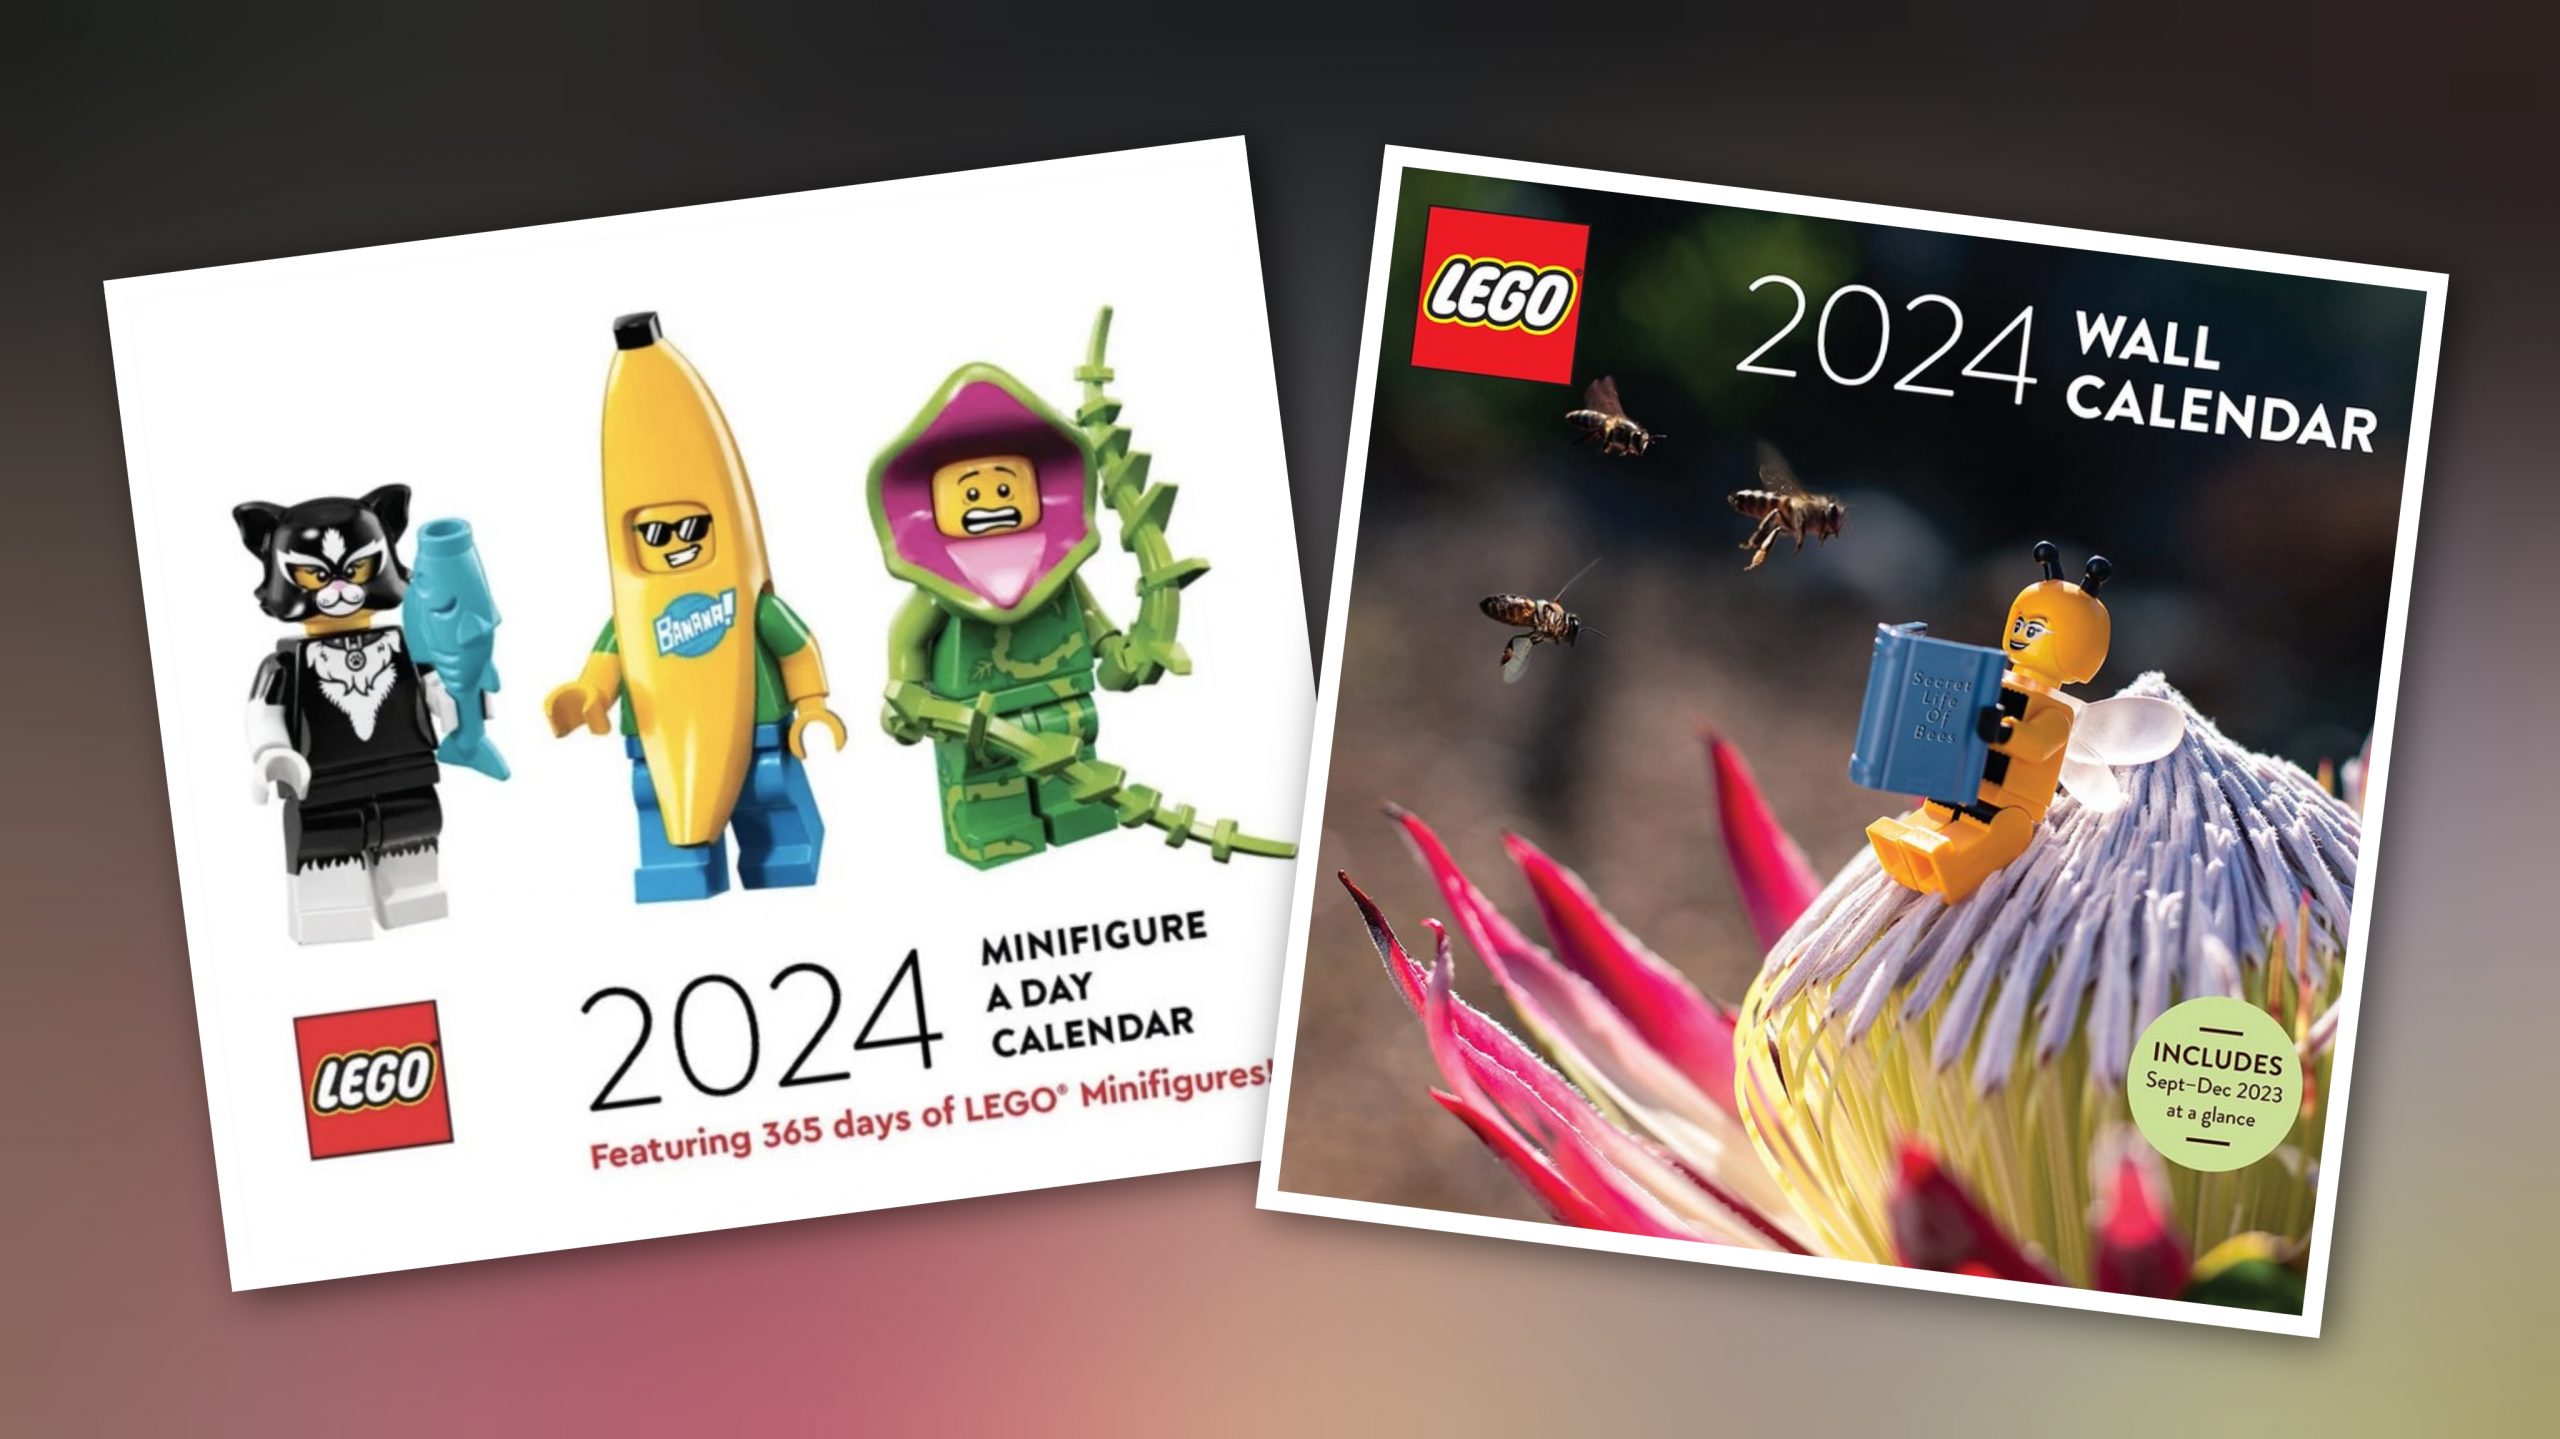 LEGO 2024 Wall And Minifigure A Day Calendars Revealed! – The Brick Post!